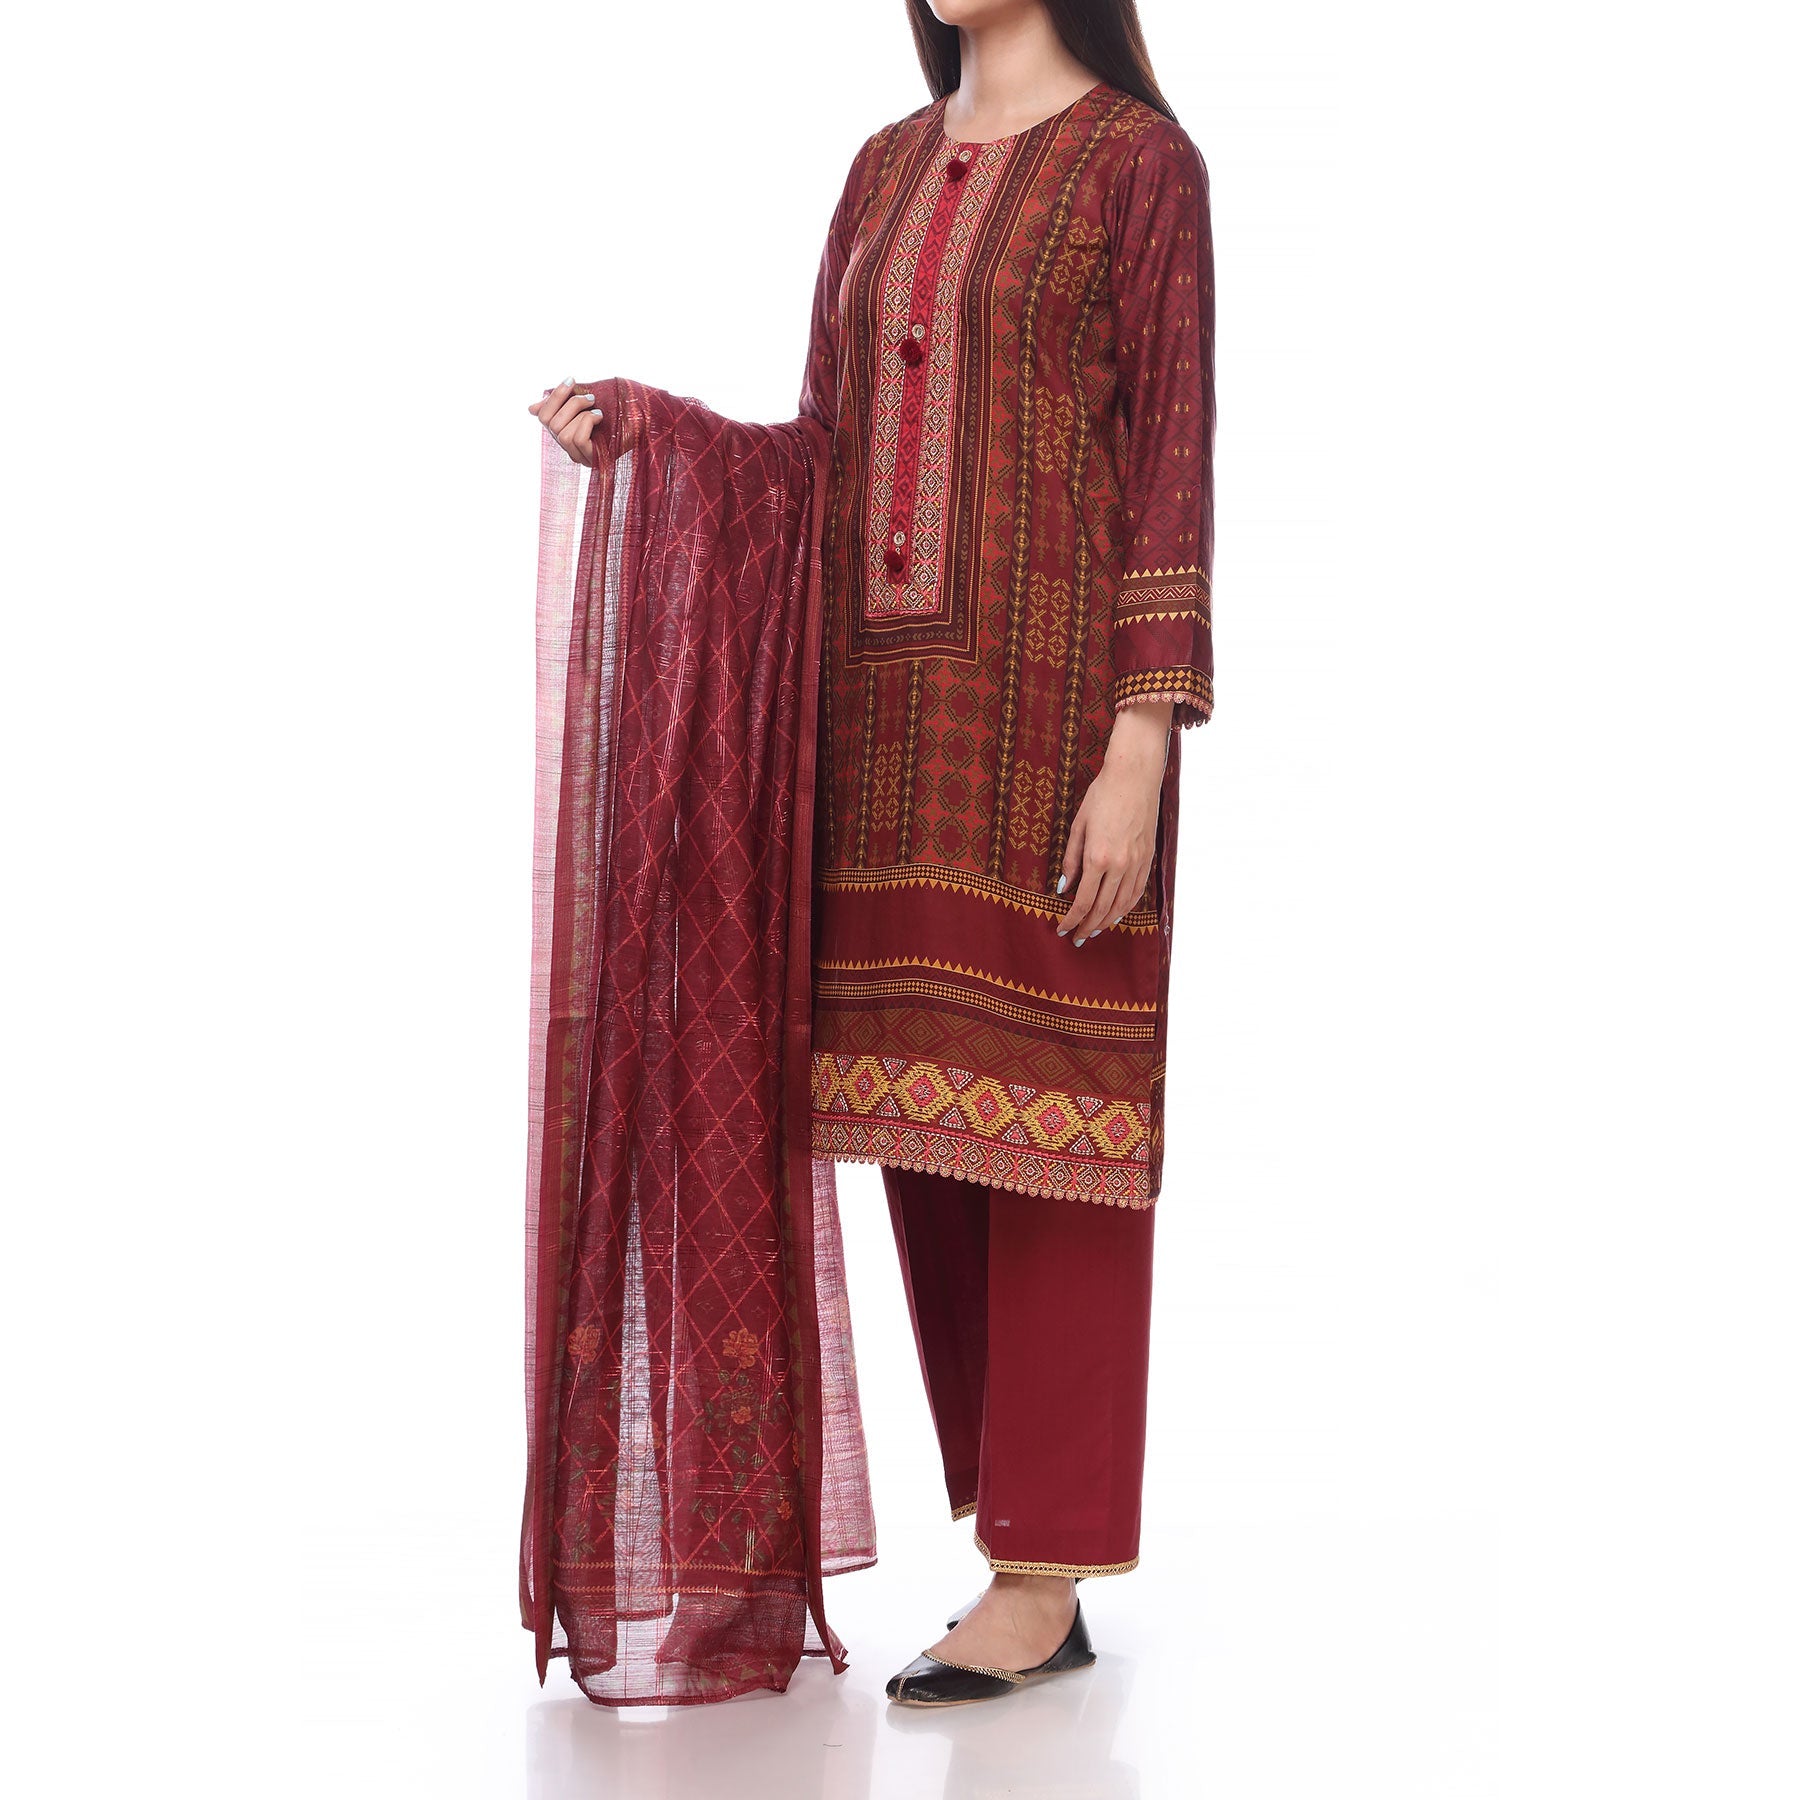 Digital Printed Lawn Shirt With Embroiderd Lace on Neck and Bottom
Digtal Printed Tila Border Dupatta
Plain Dyed Cambric Trousers